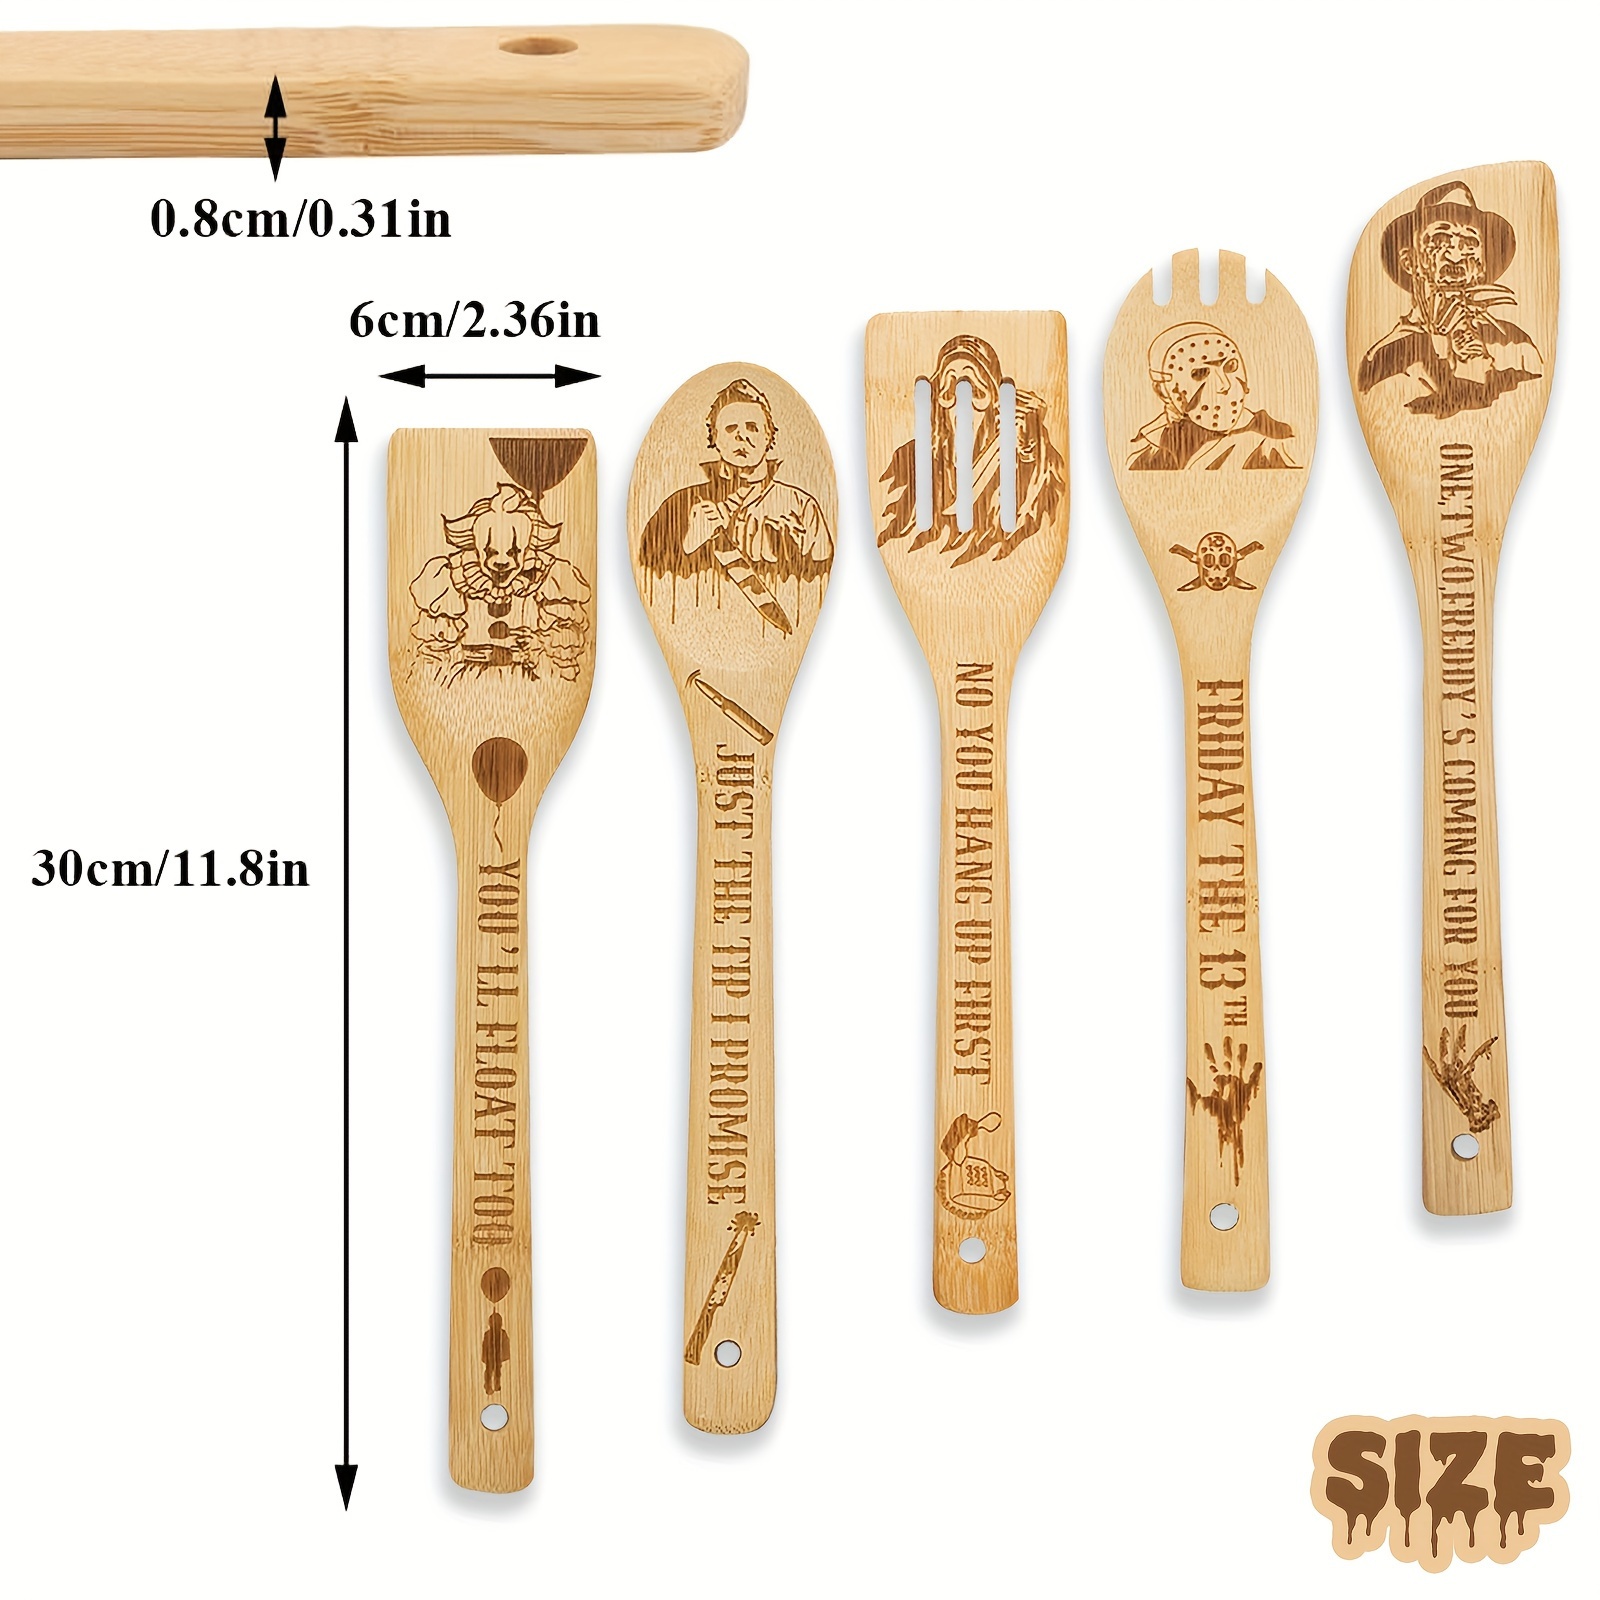 5pcs cooking spoons funny engraved wooden cooking spoons horror character bamboo wood utensils cookware kit horror movie theme kitchen decor gift for movie lover christmas party housewarming birthday gift details 3